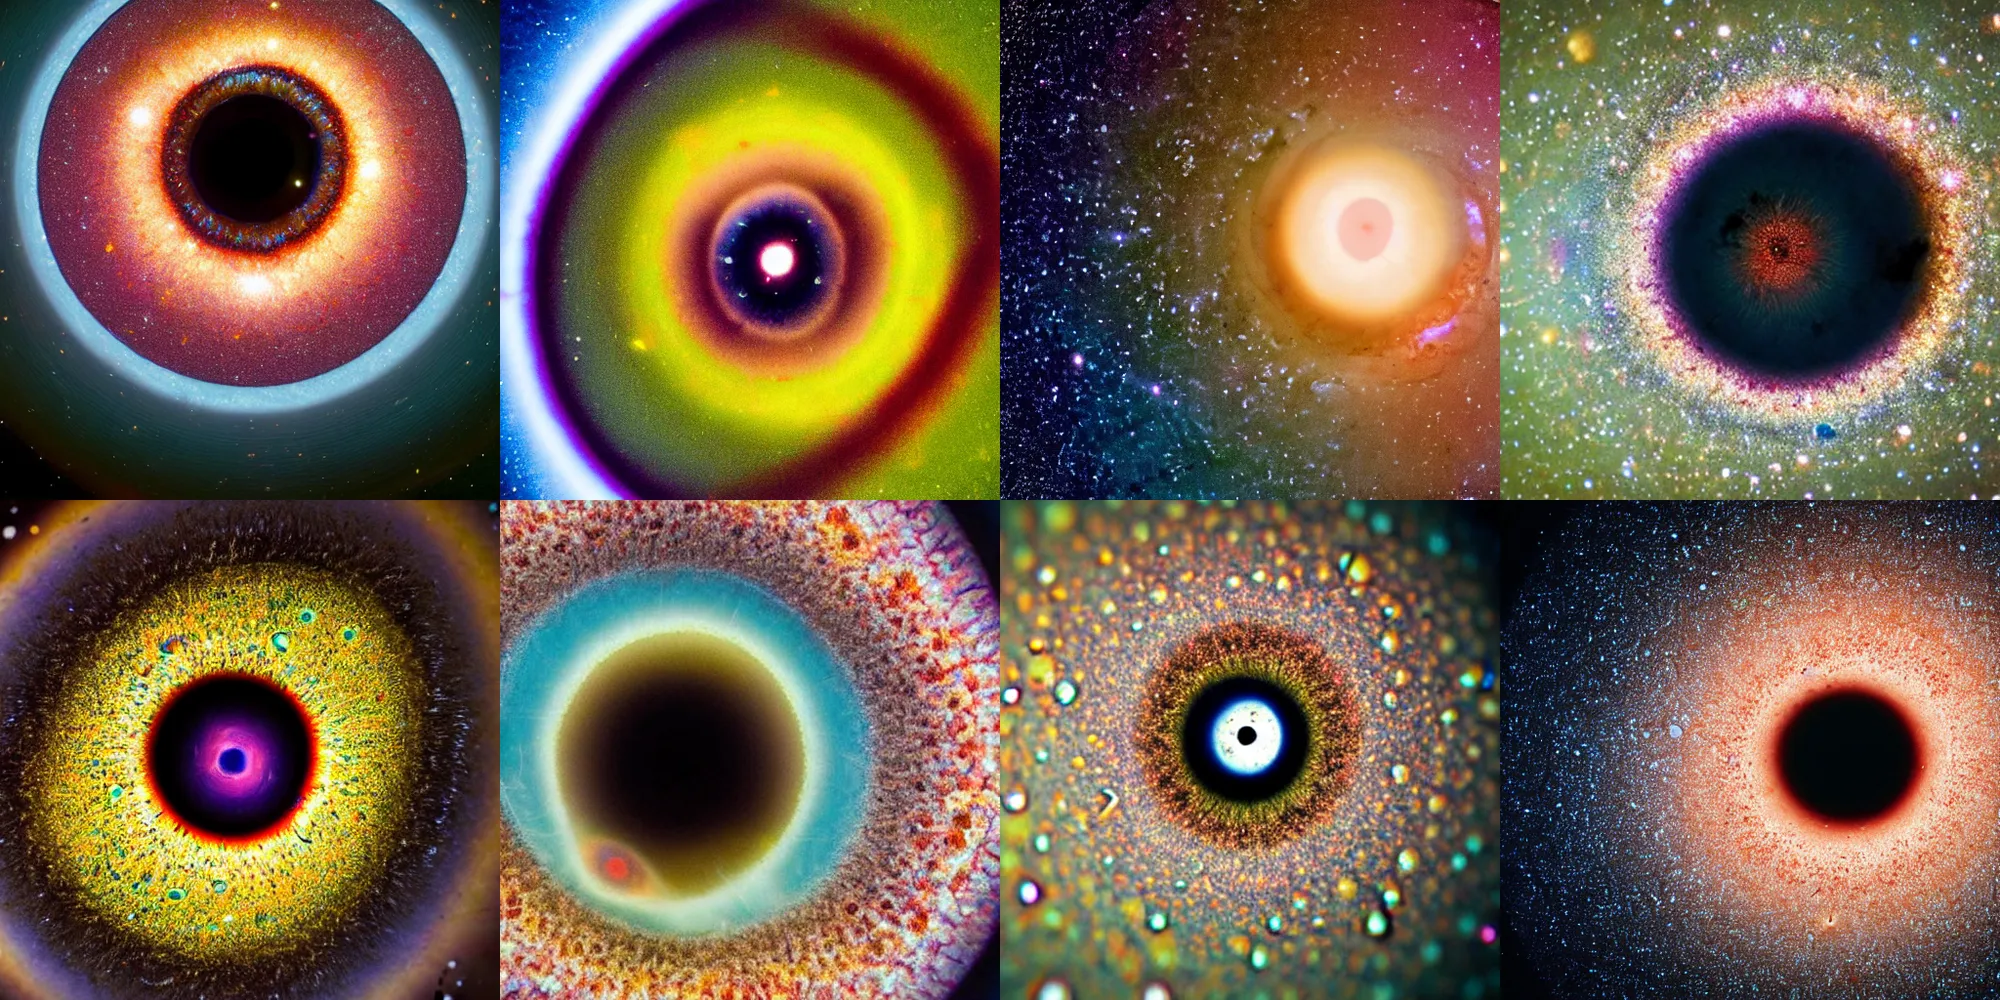 Prompt: extreme close-up photo of an eyeball containing a colourful galaxy